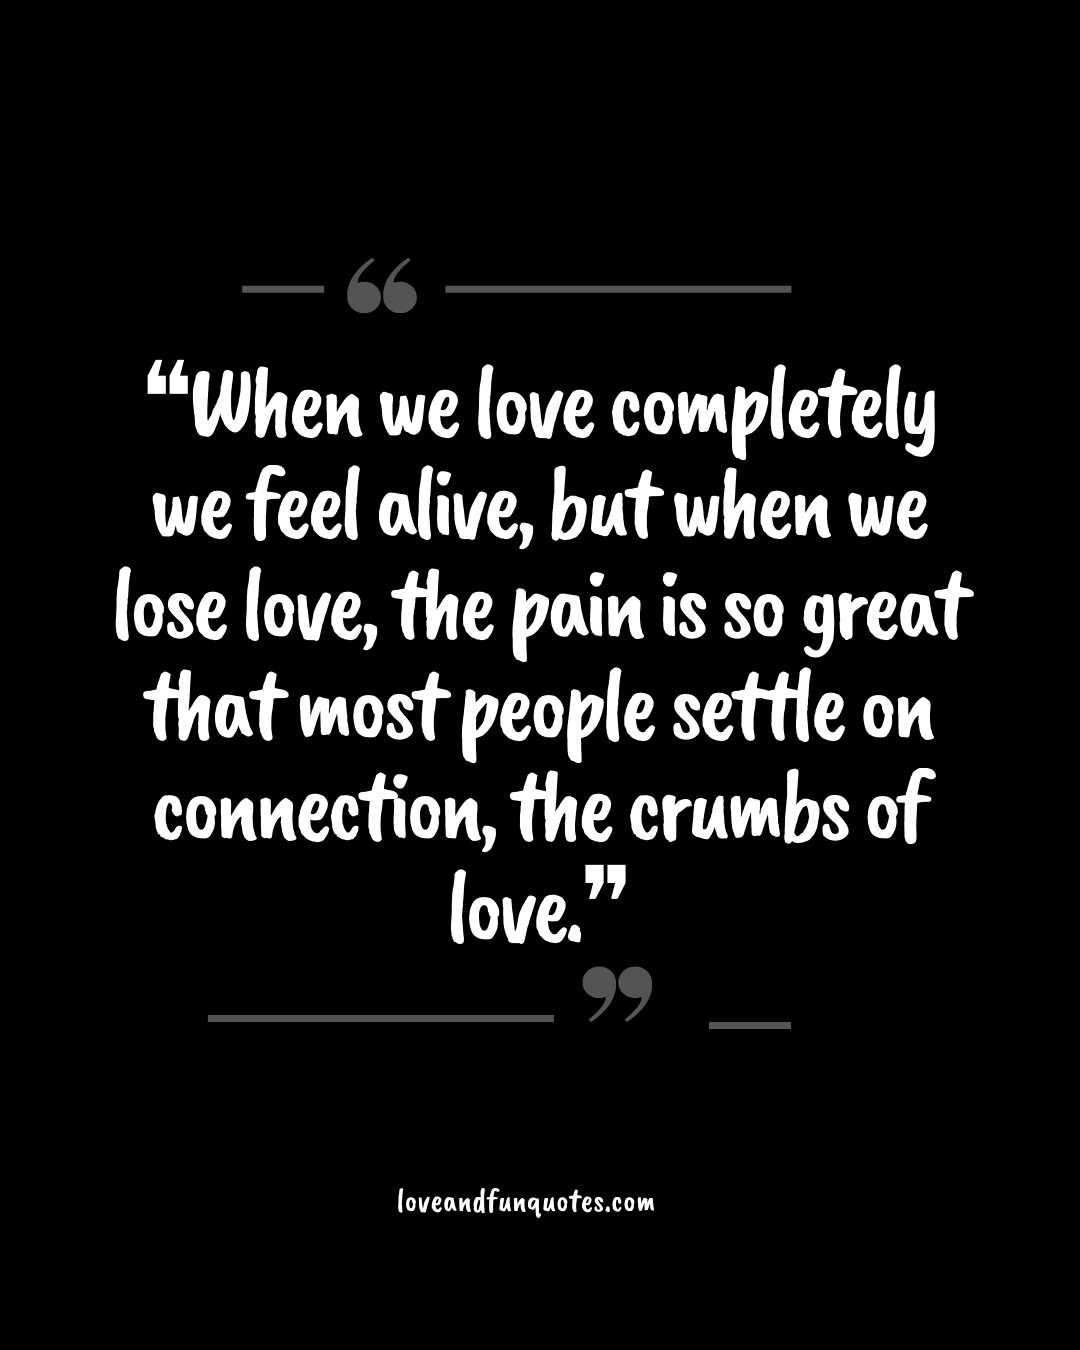 ❝When we love completely we feel alive, but when we lose love, the pain is so great that most people settle on connection, the crumbs of love.❞